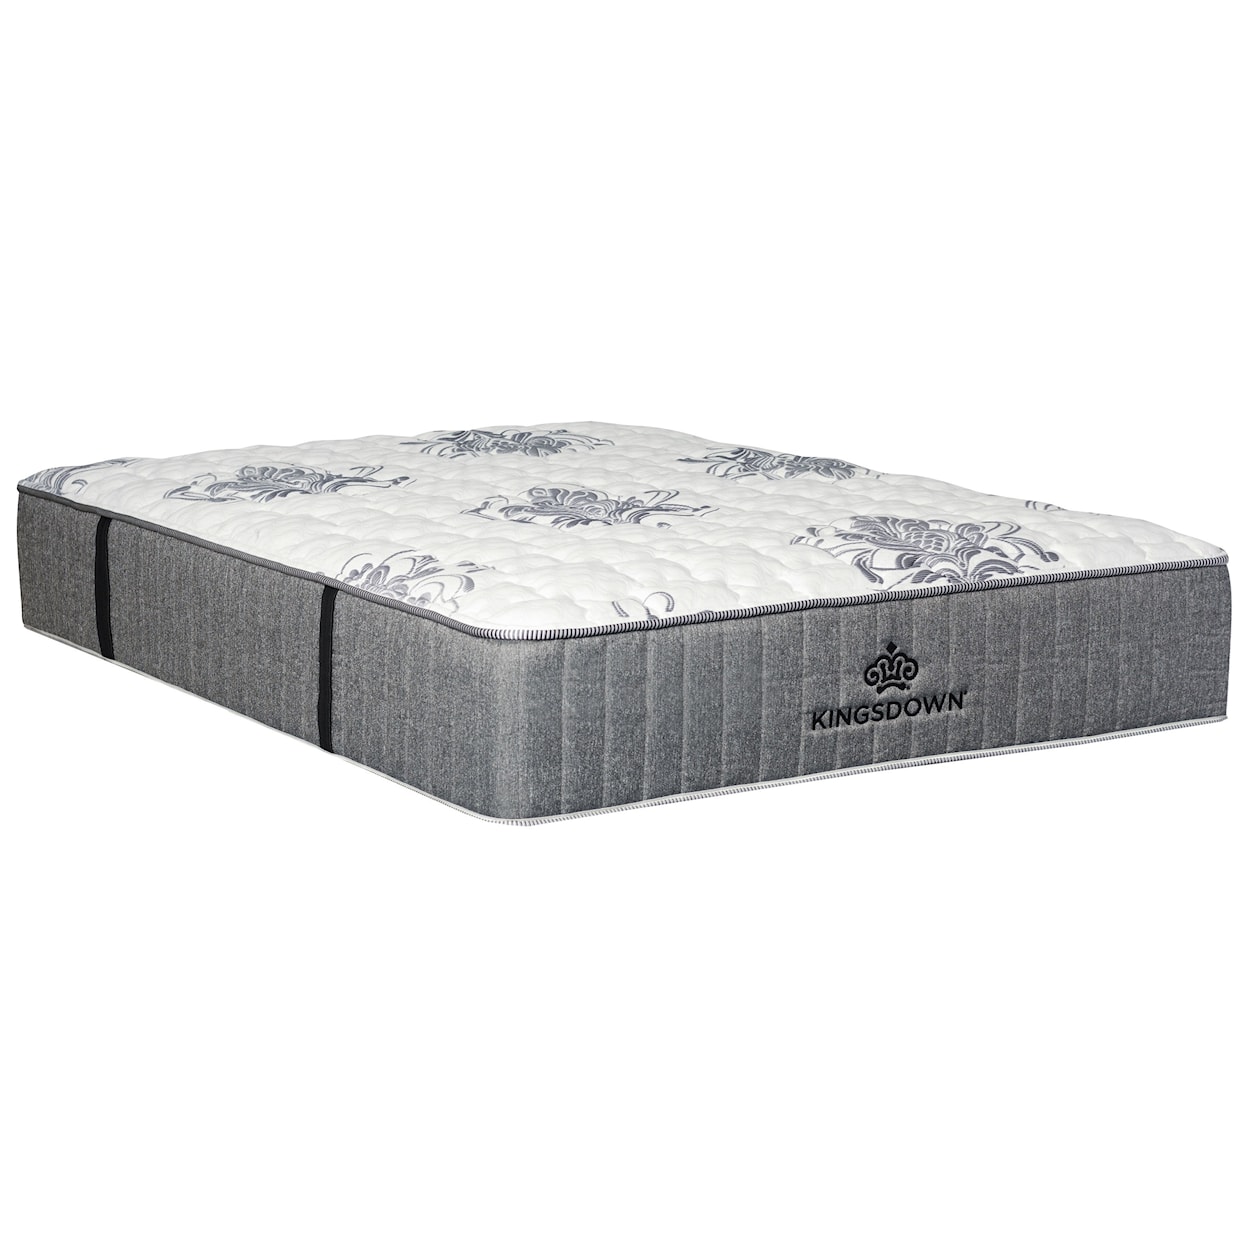 Kingsdown Passions Zest Firm Twin 14 1/2" Firm Coil on Coil Mattress